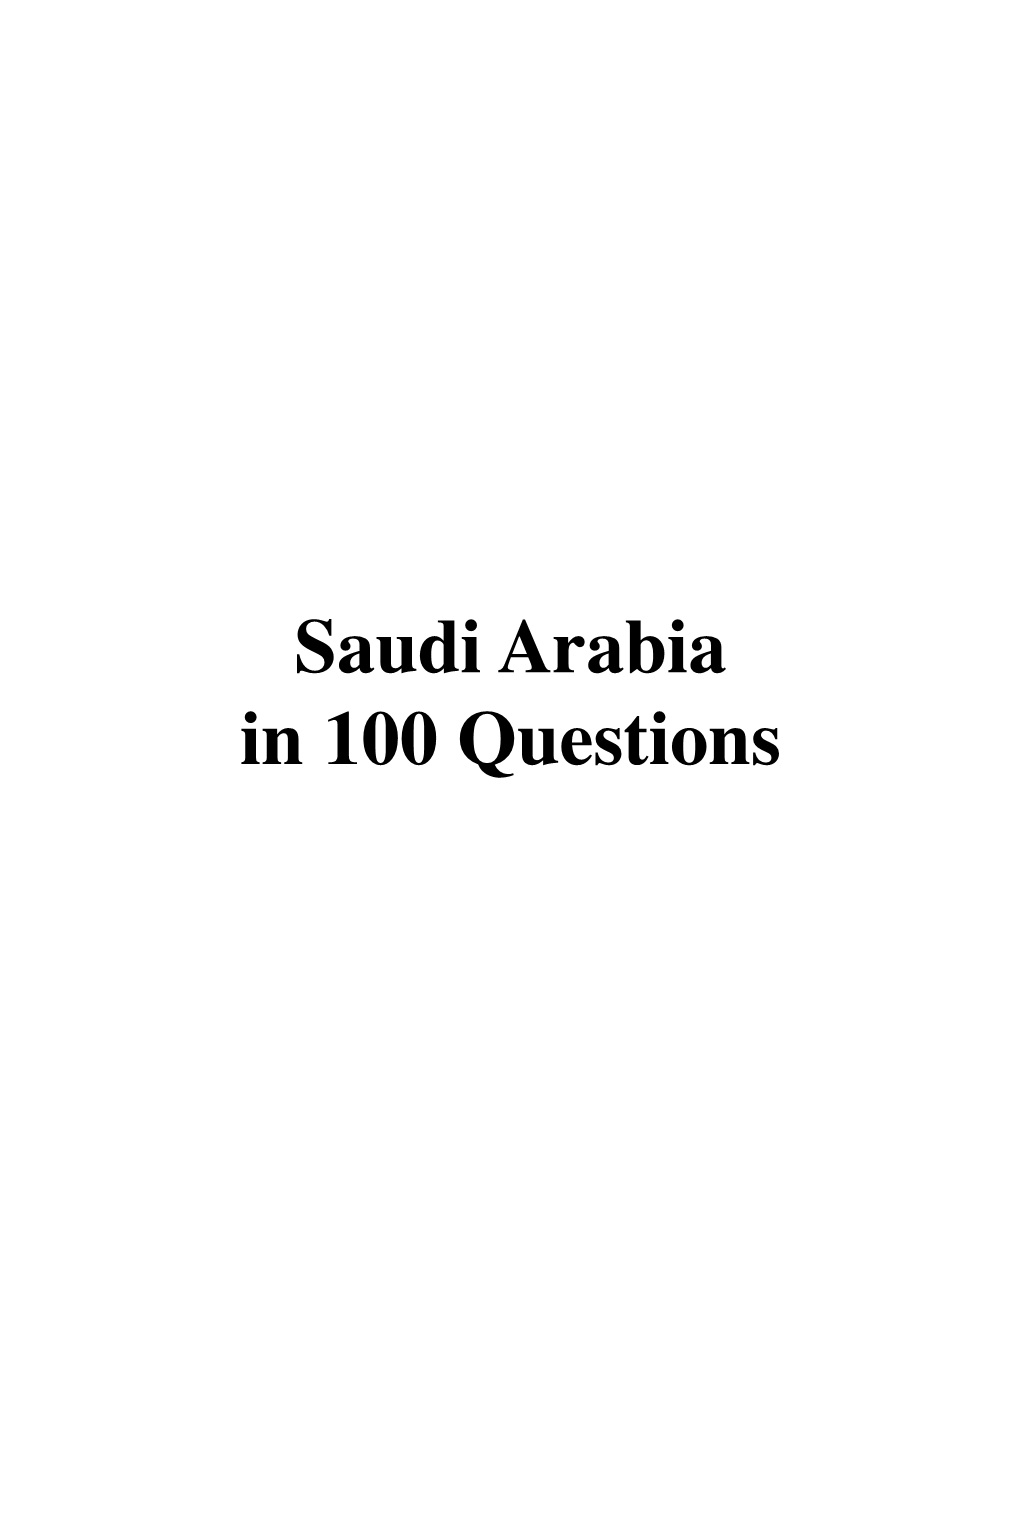 Saudi Arabia in 100 Questions All Rights Reserved for Publisher